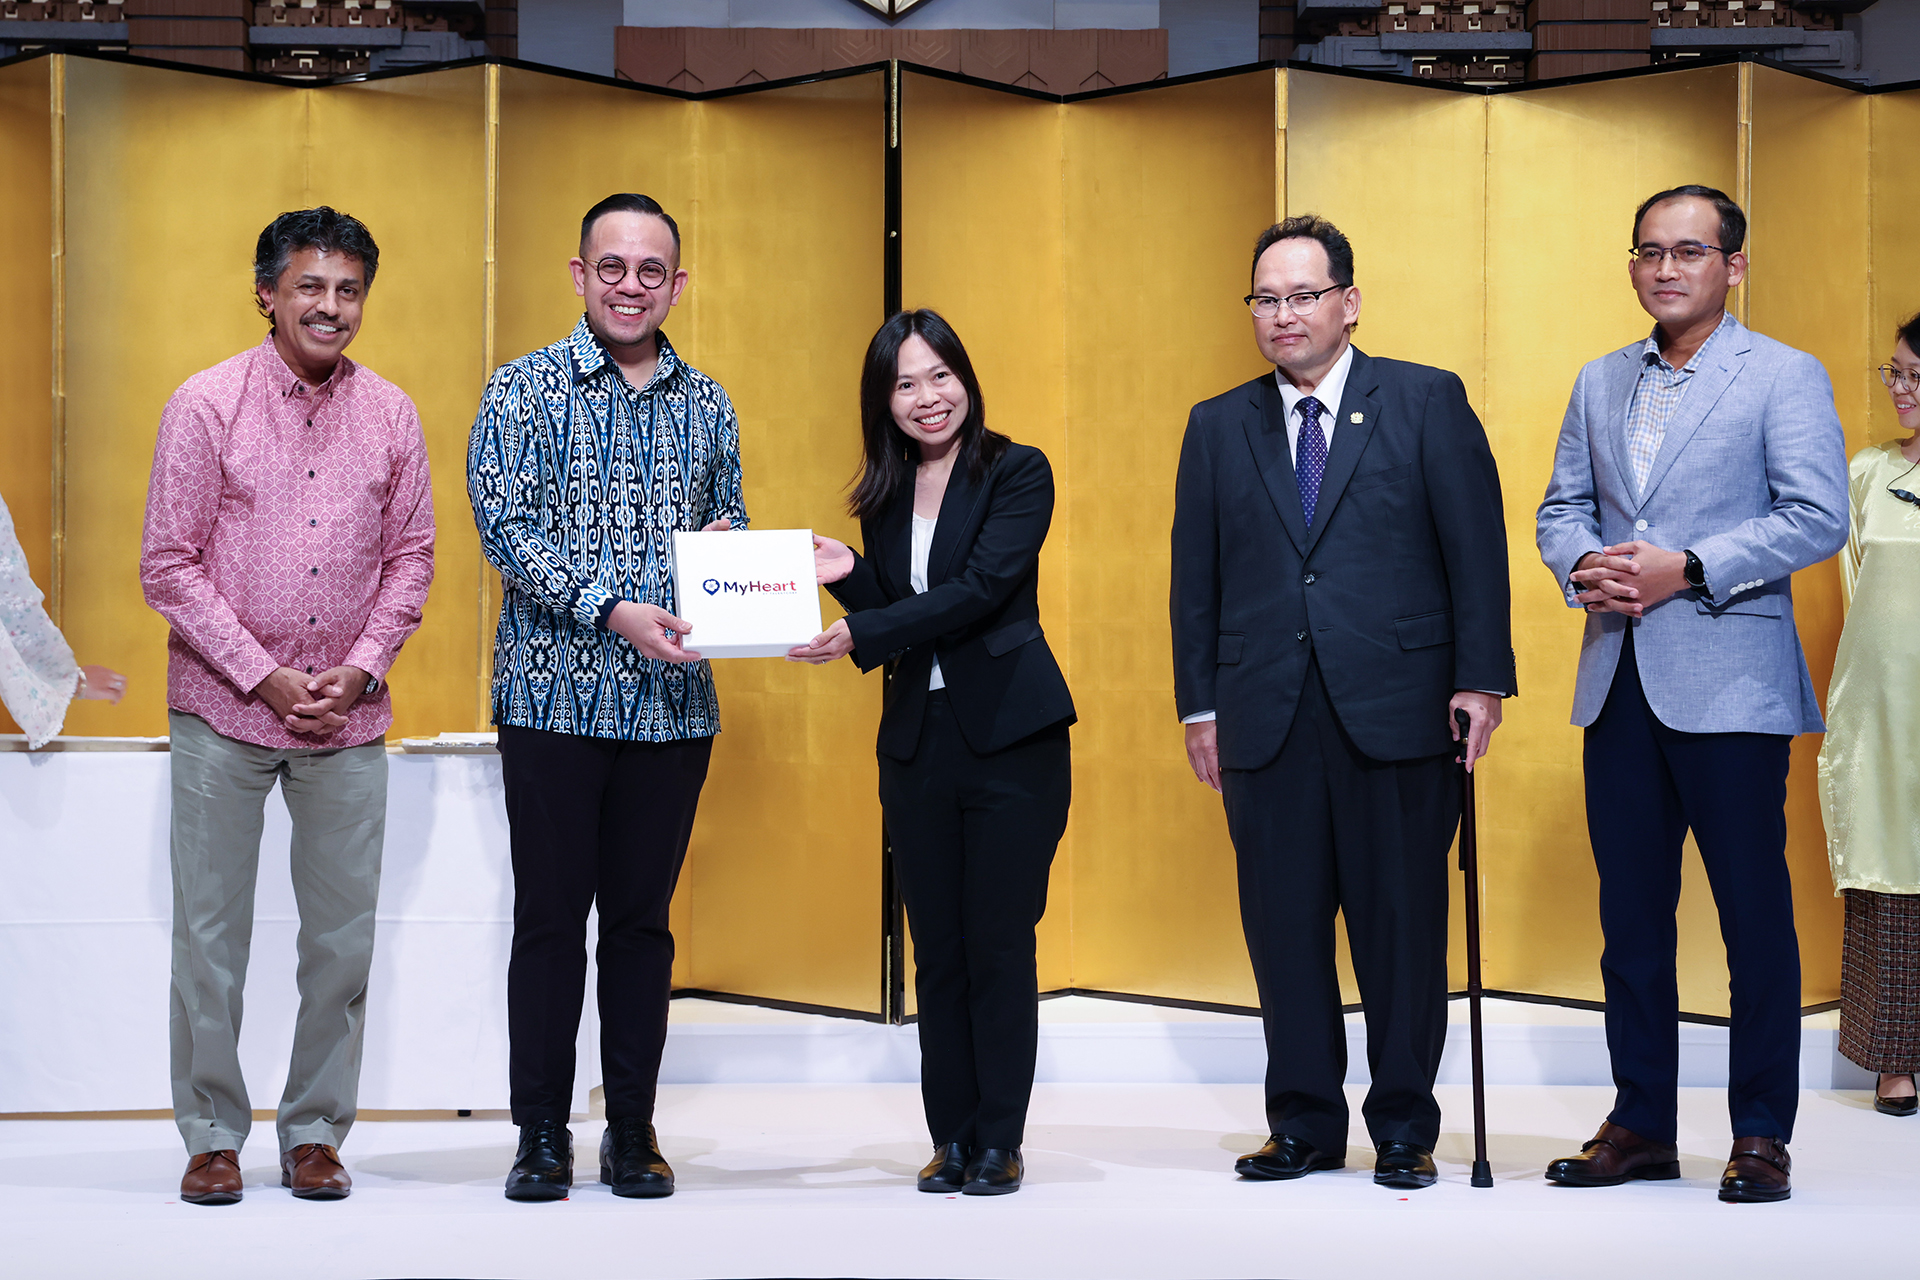 YB Steven Sim Chee Keong, Minister of Human Resources presented the TalentCorp Grant to Dr. Amy Poh Ai Ling, Malaysian Professional currently residing in Japan